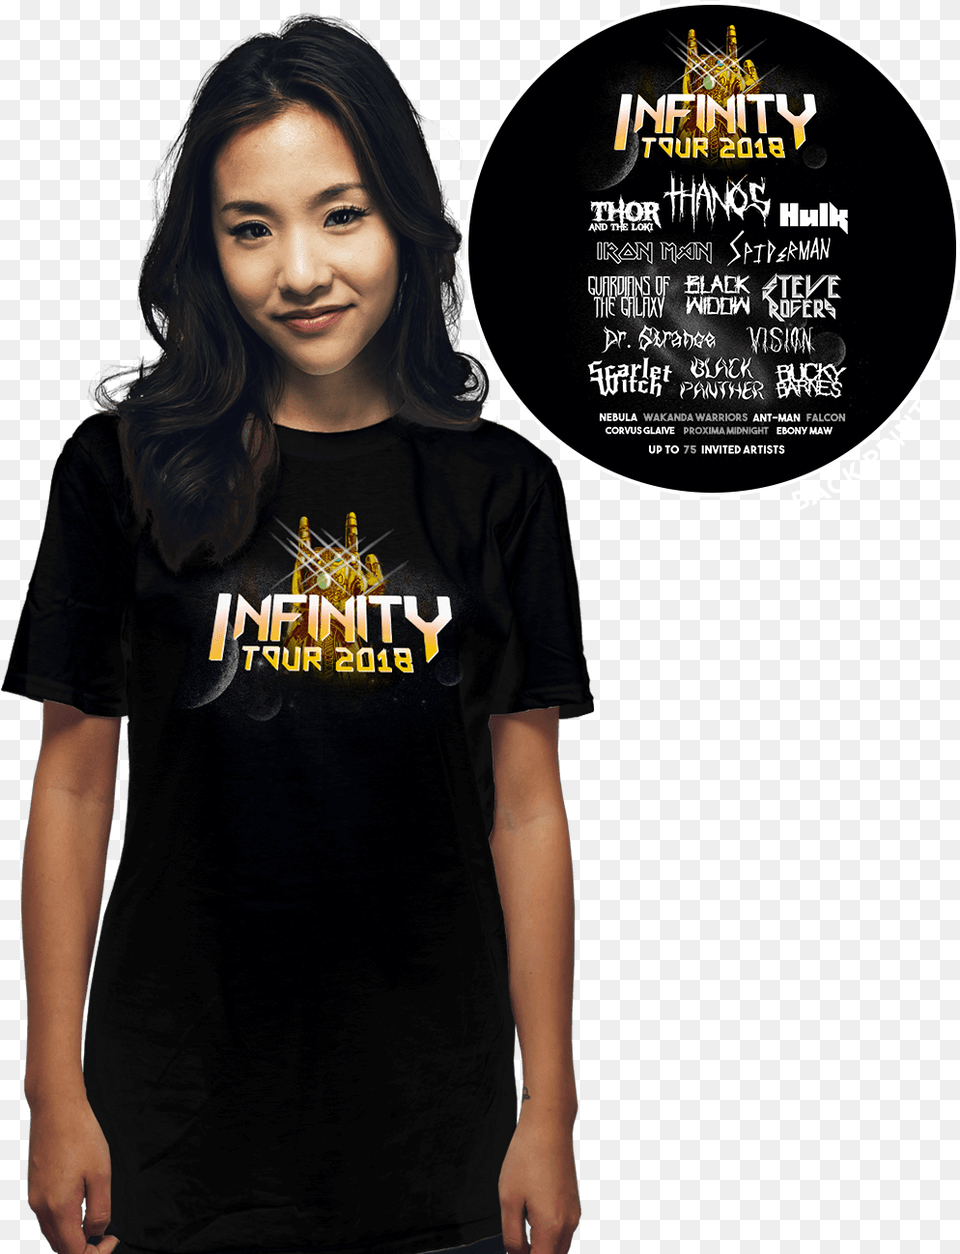 Infinity Tour 2018 Shirt, Advertisement, Clothing, T-shirt, Adult Png